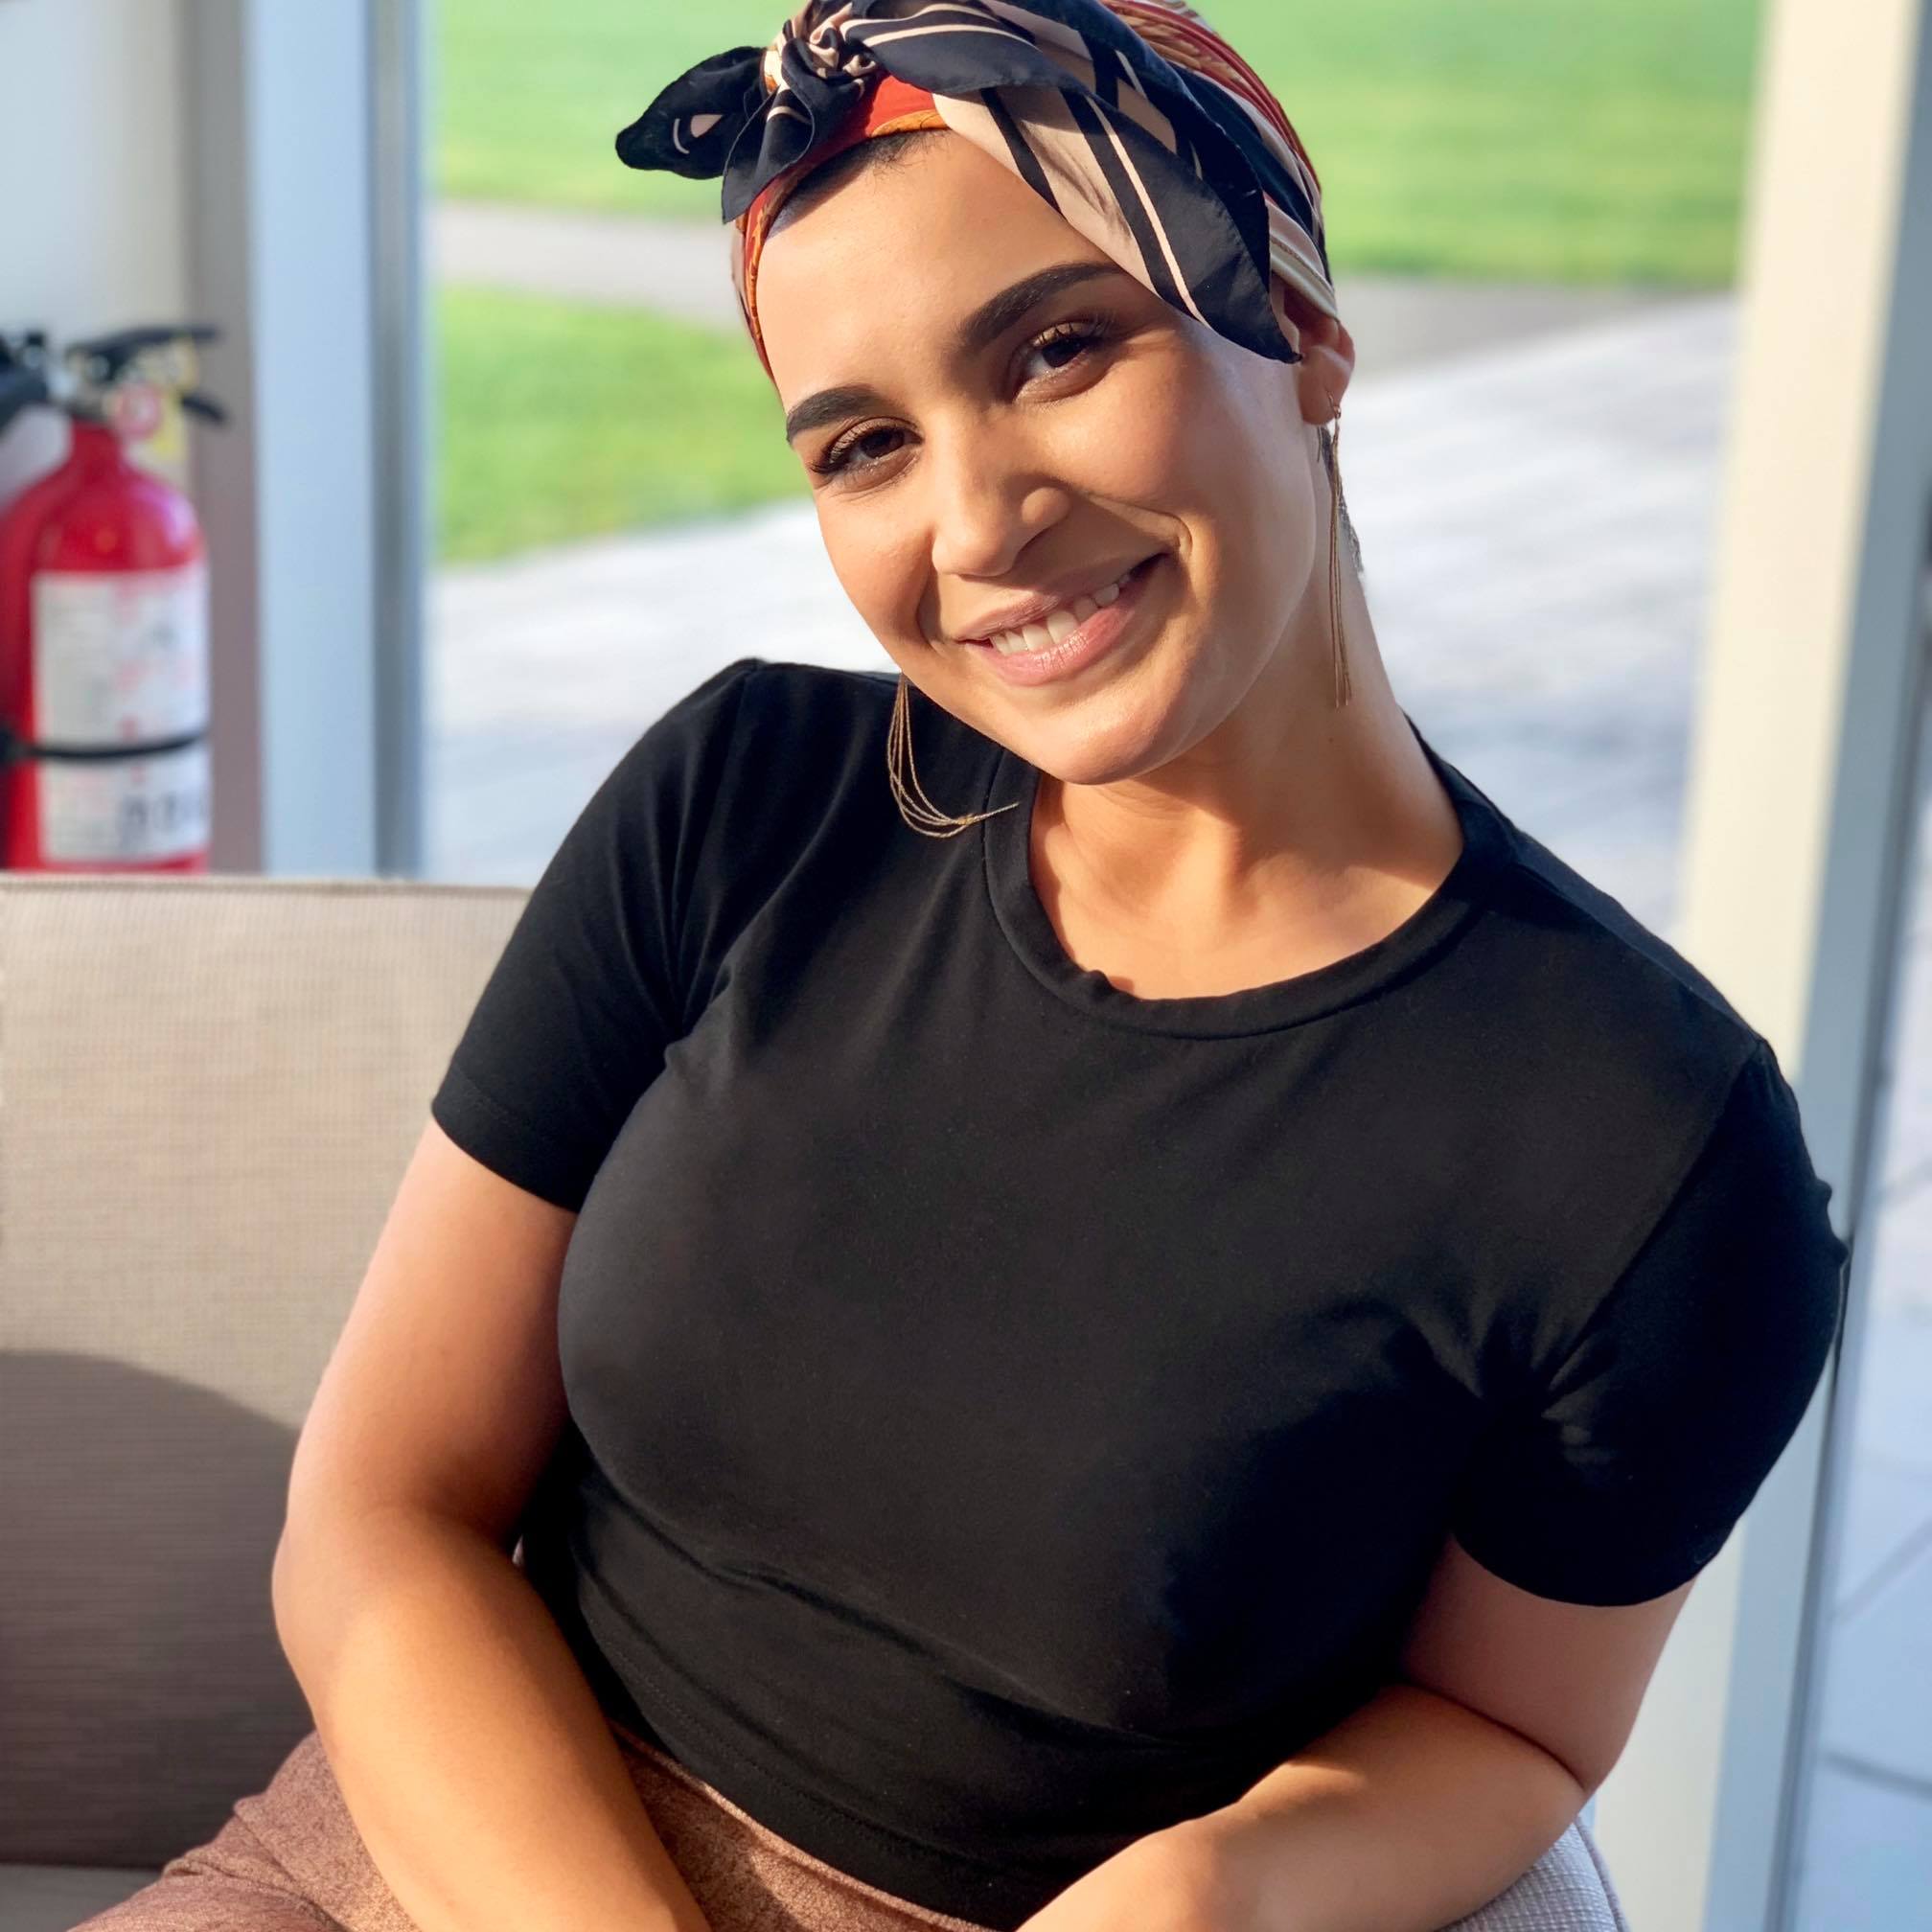 Imène Tissoukai, in a black t-shirt and patterned head scarf, smiles at the camera